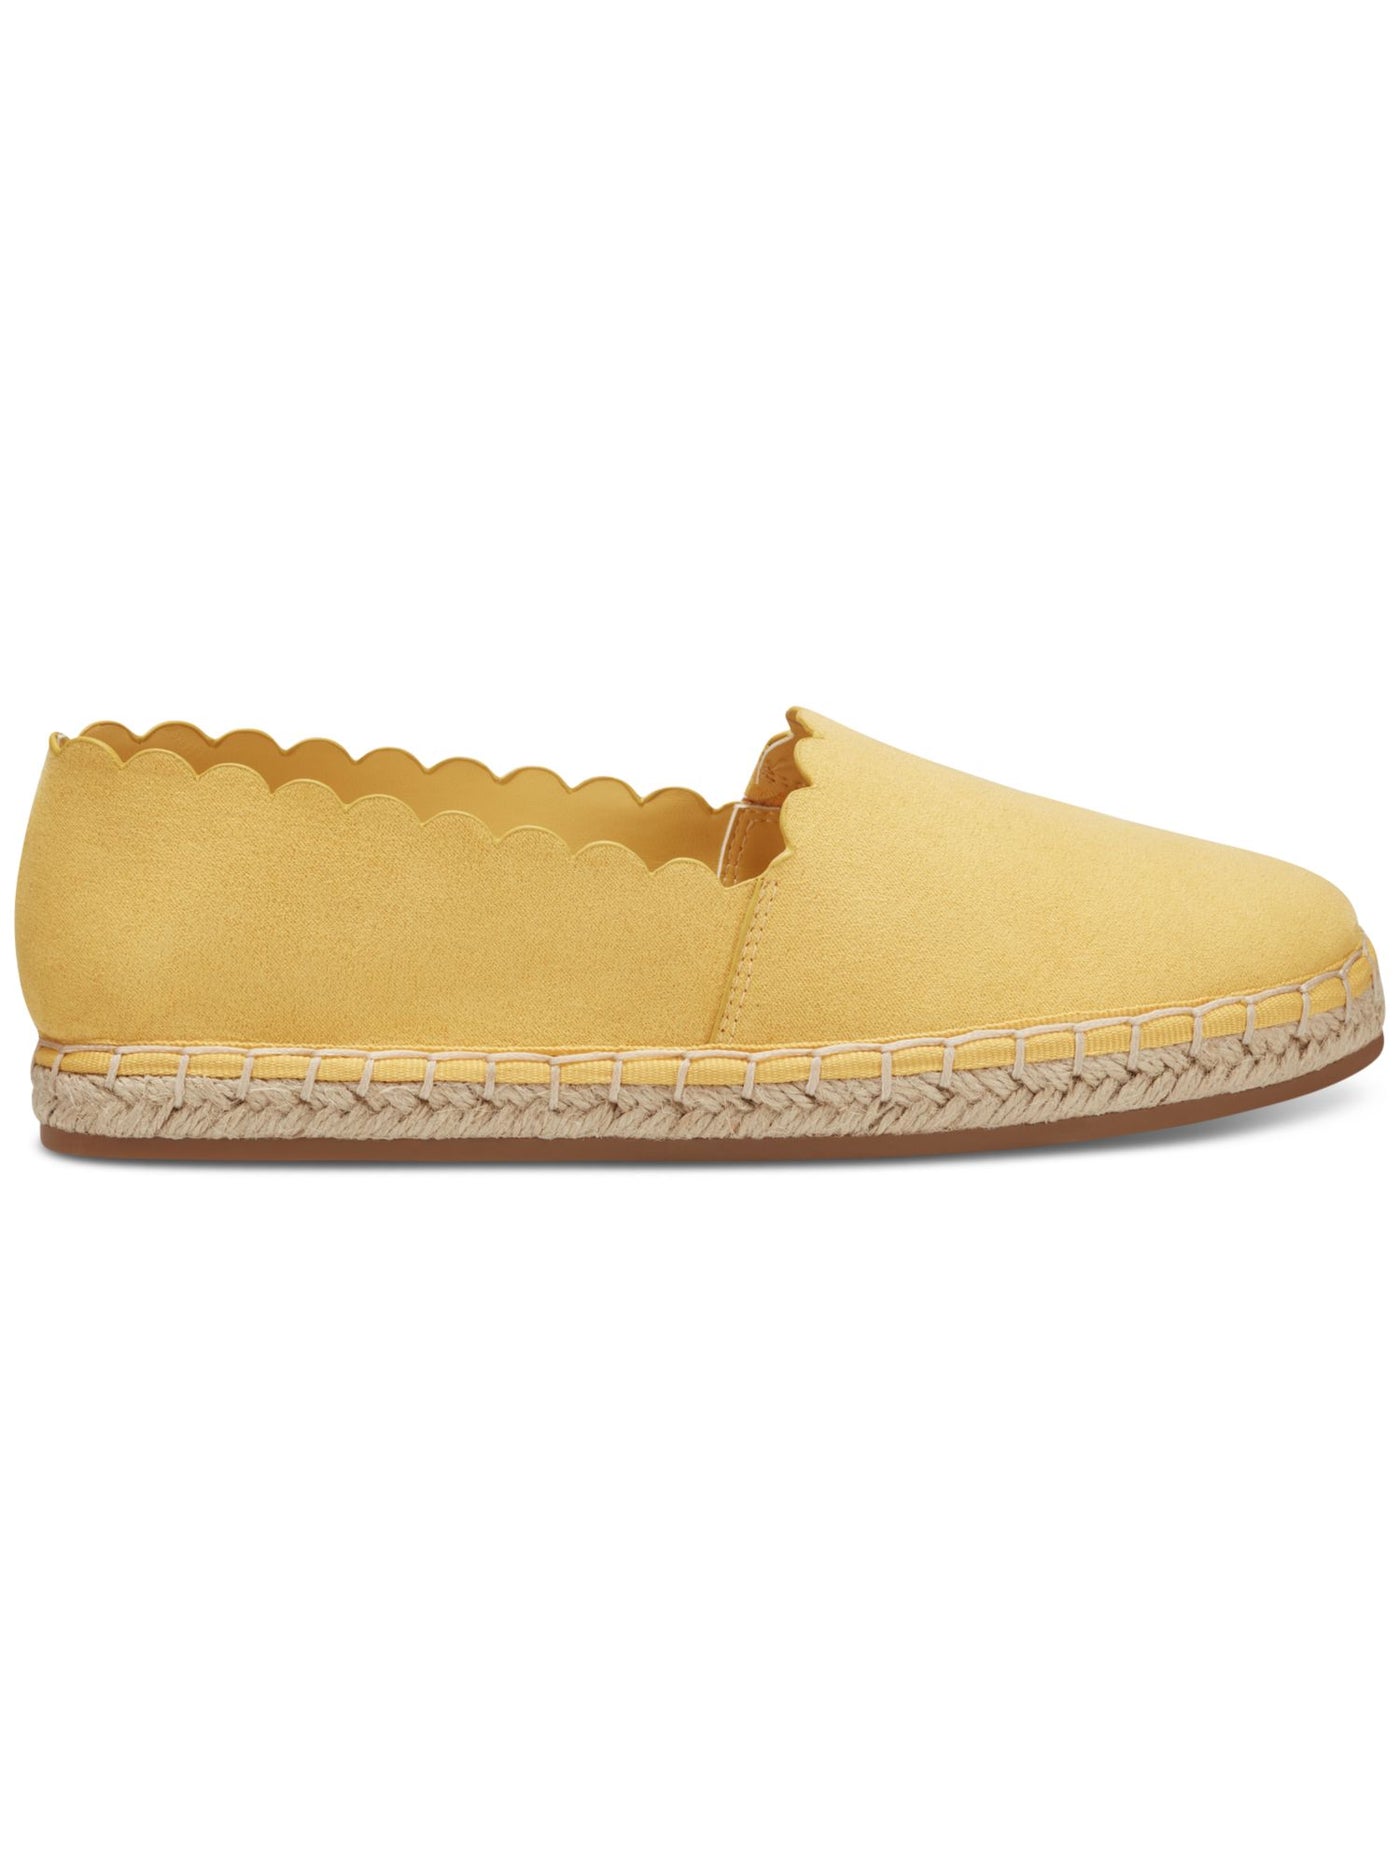 CHARTER CLUB Womens Yellow Padded Scalloped Goring Joliee Round Toe Slip On Espadrille Shoes 7 M